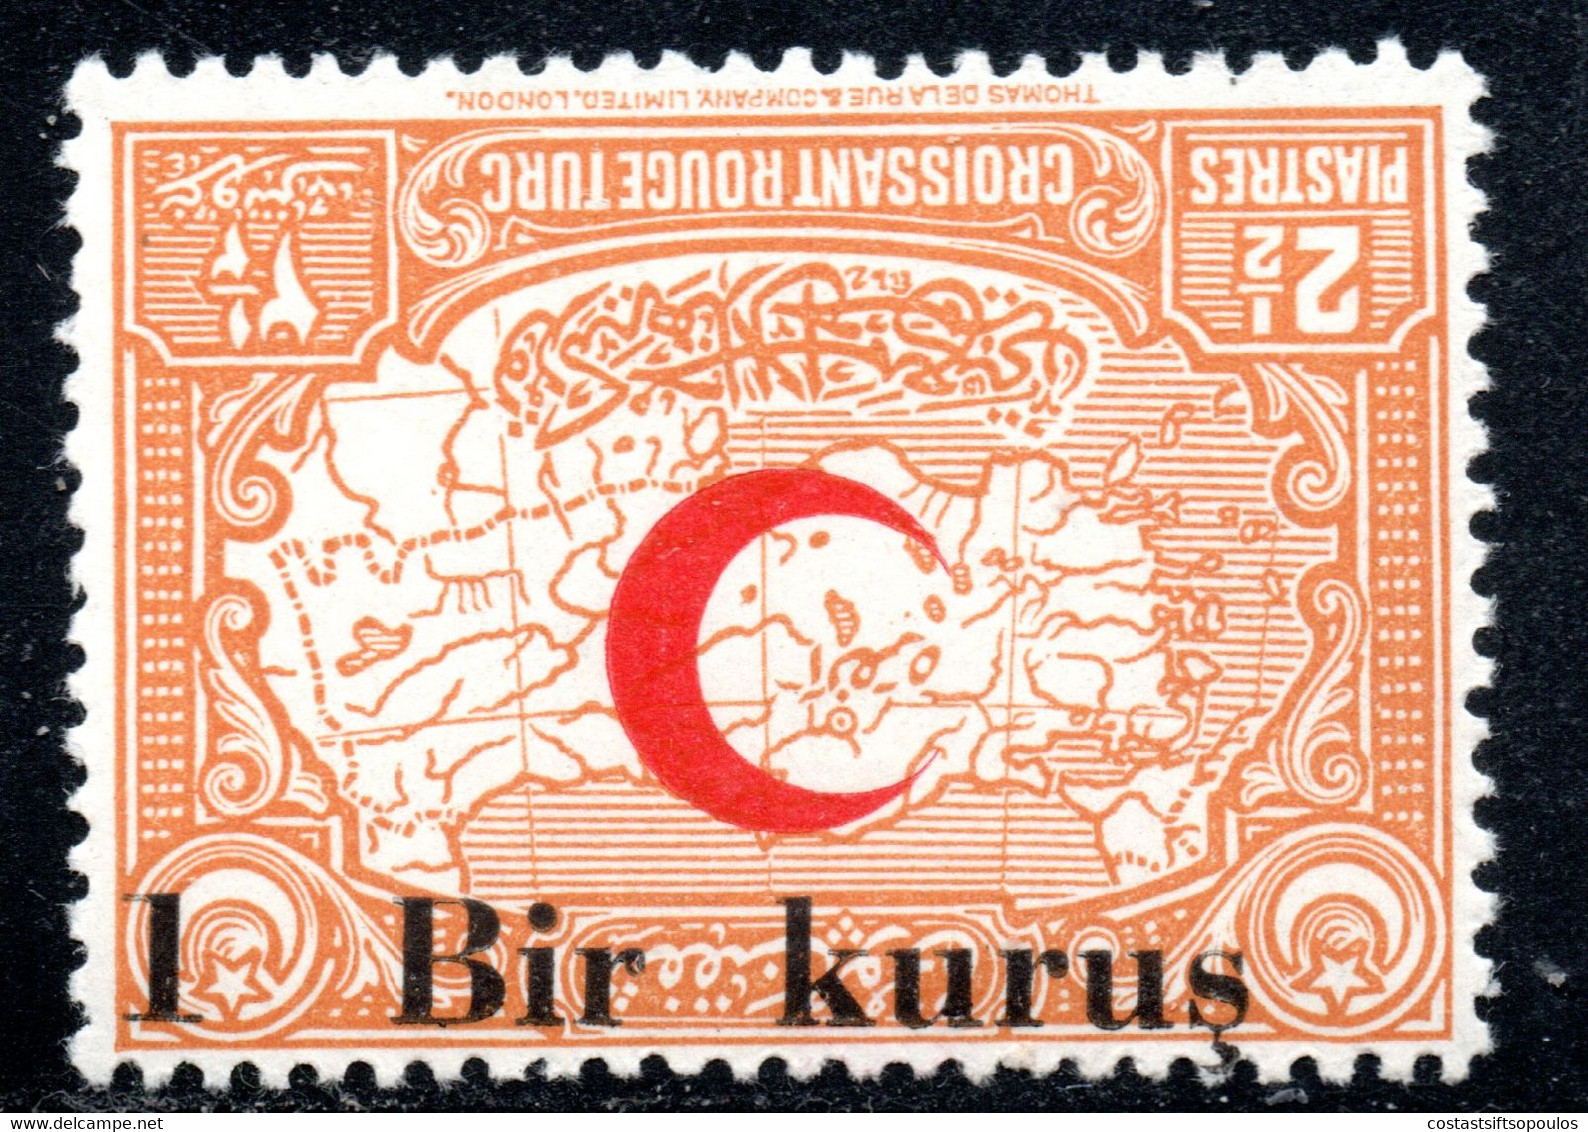 1011.TURKEY,1933-1934 RED CRESCENT,MAP MICH.24,SC.RA 21 INVERTED SURCHARGE,MNH,UNRECORDED - Nuevos